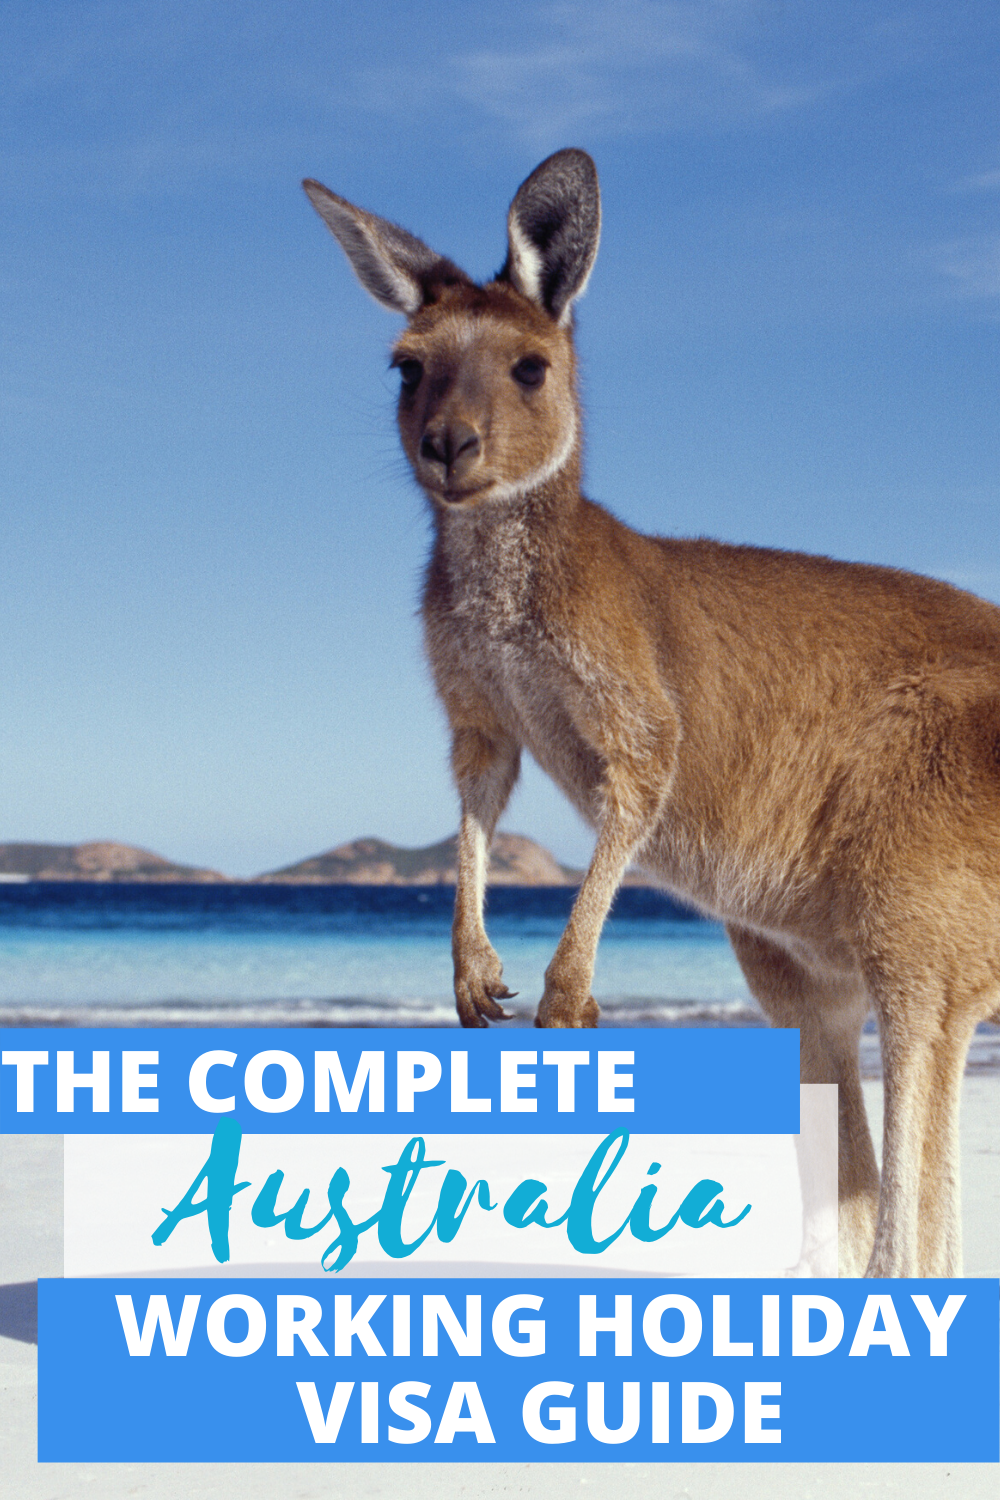 Australia Working Holiday Visa Guide: everything you need to know about the application, money requirements, how much money to take, what to do when you arrive, finding a working holiday job, opening a bank account, renting on a working holiday visa…